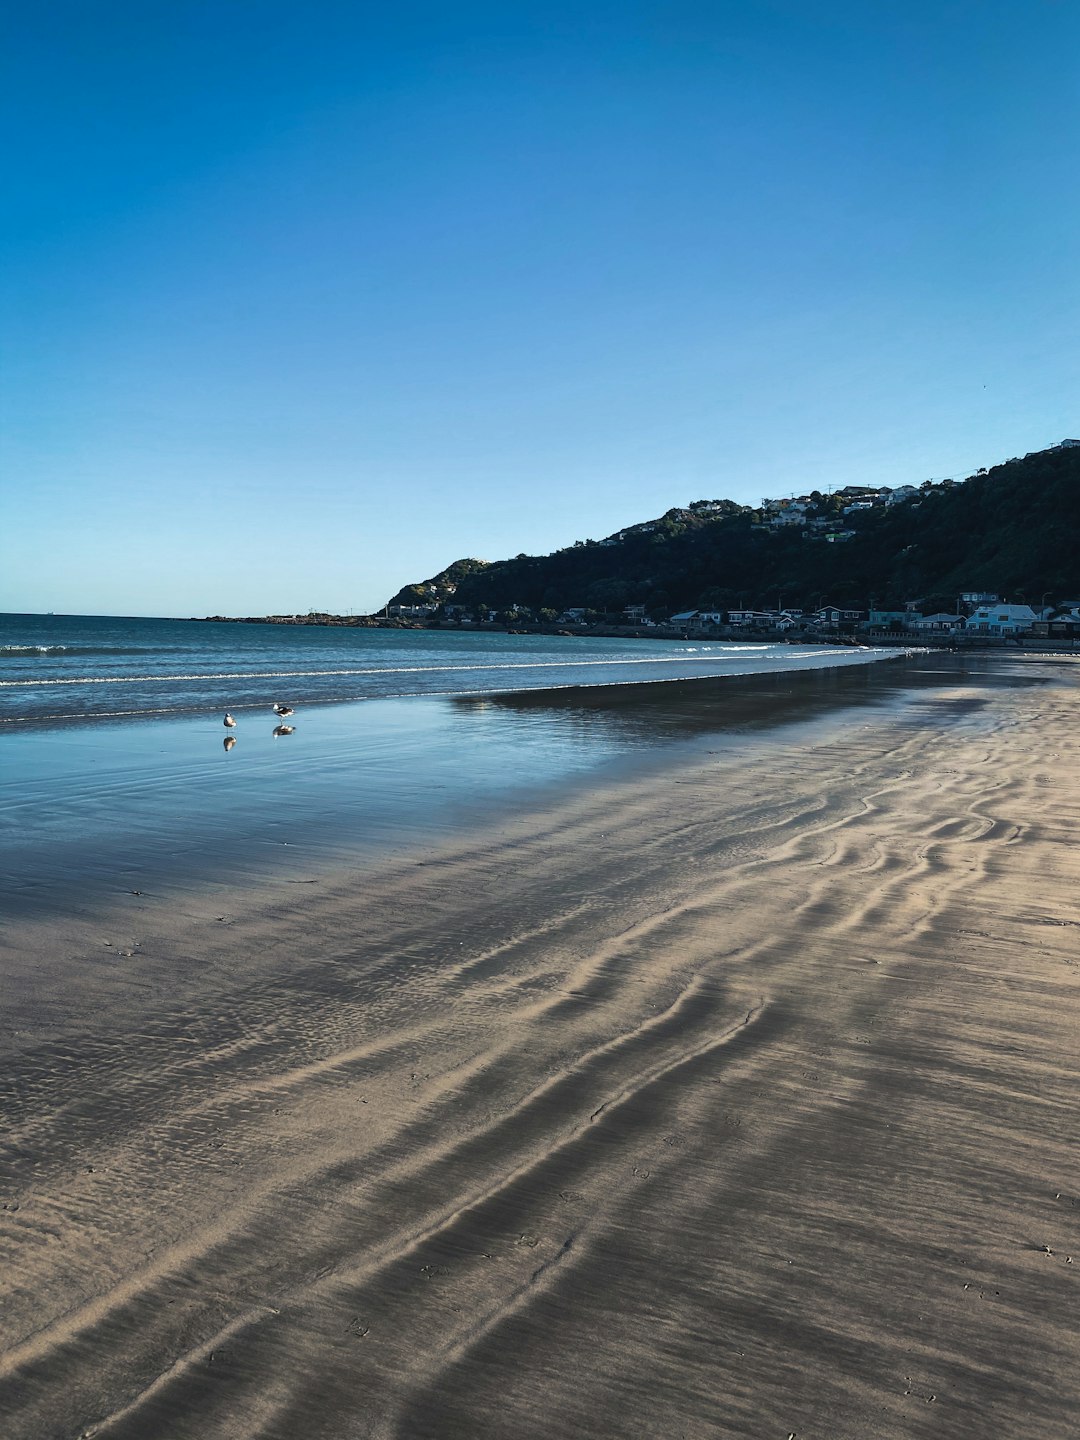 Travel Tips and Stories of Lyall Bay in New Zealand